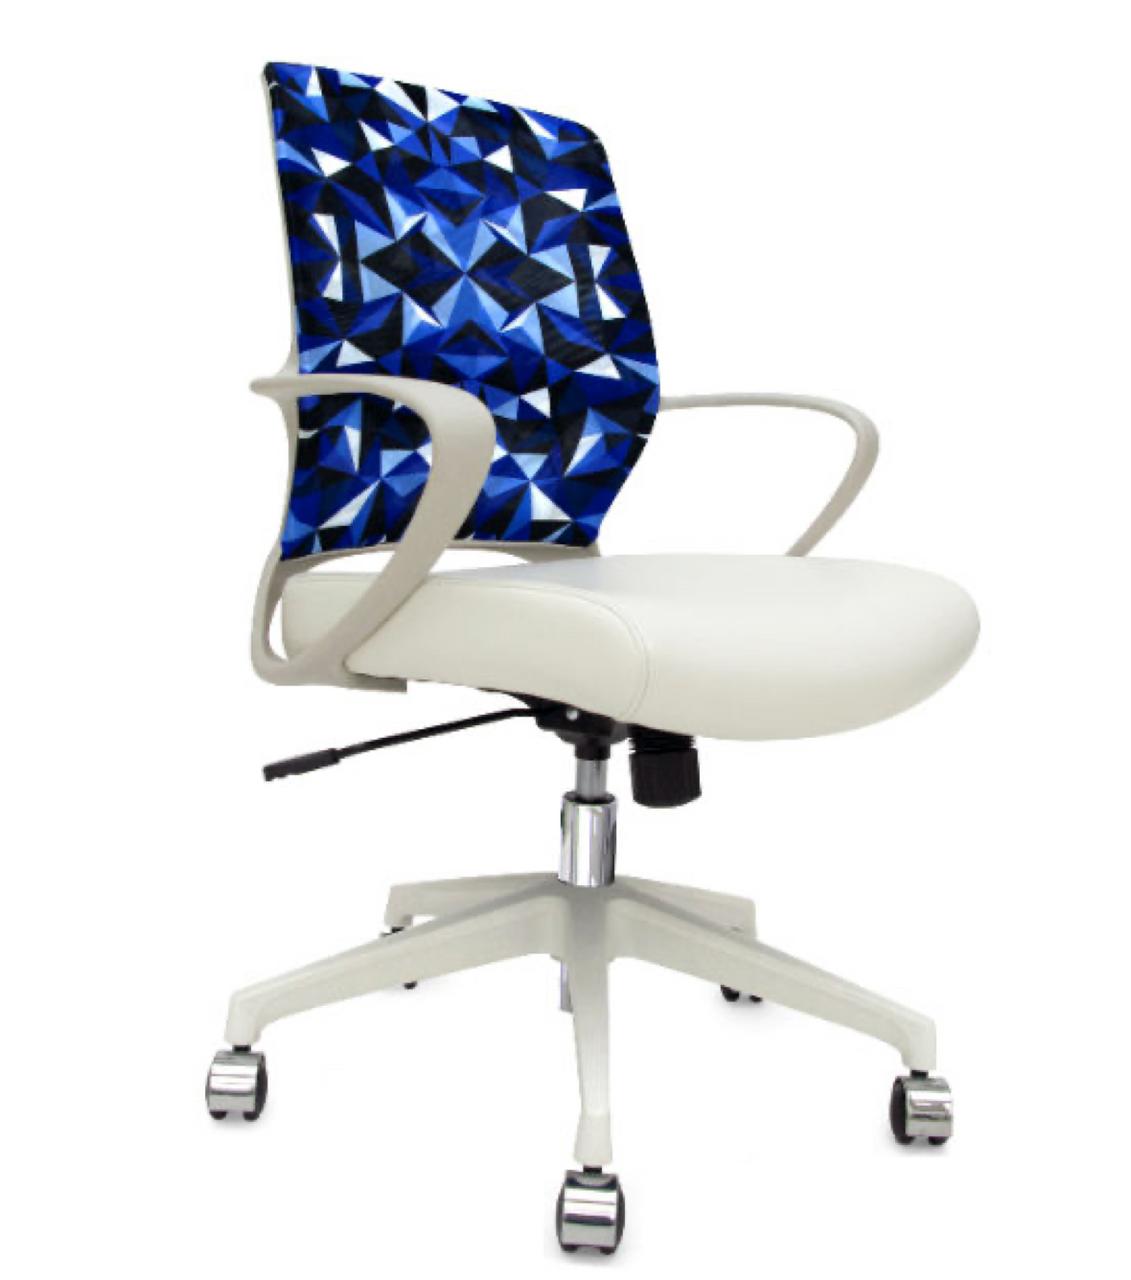 Eurotech Seating Eurotech Elizabeth Sutton Gramercy Contemporary Prism Back Upholstery Chair 